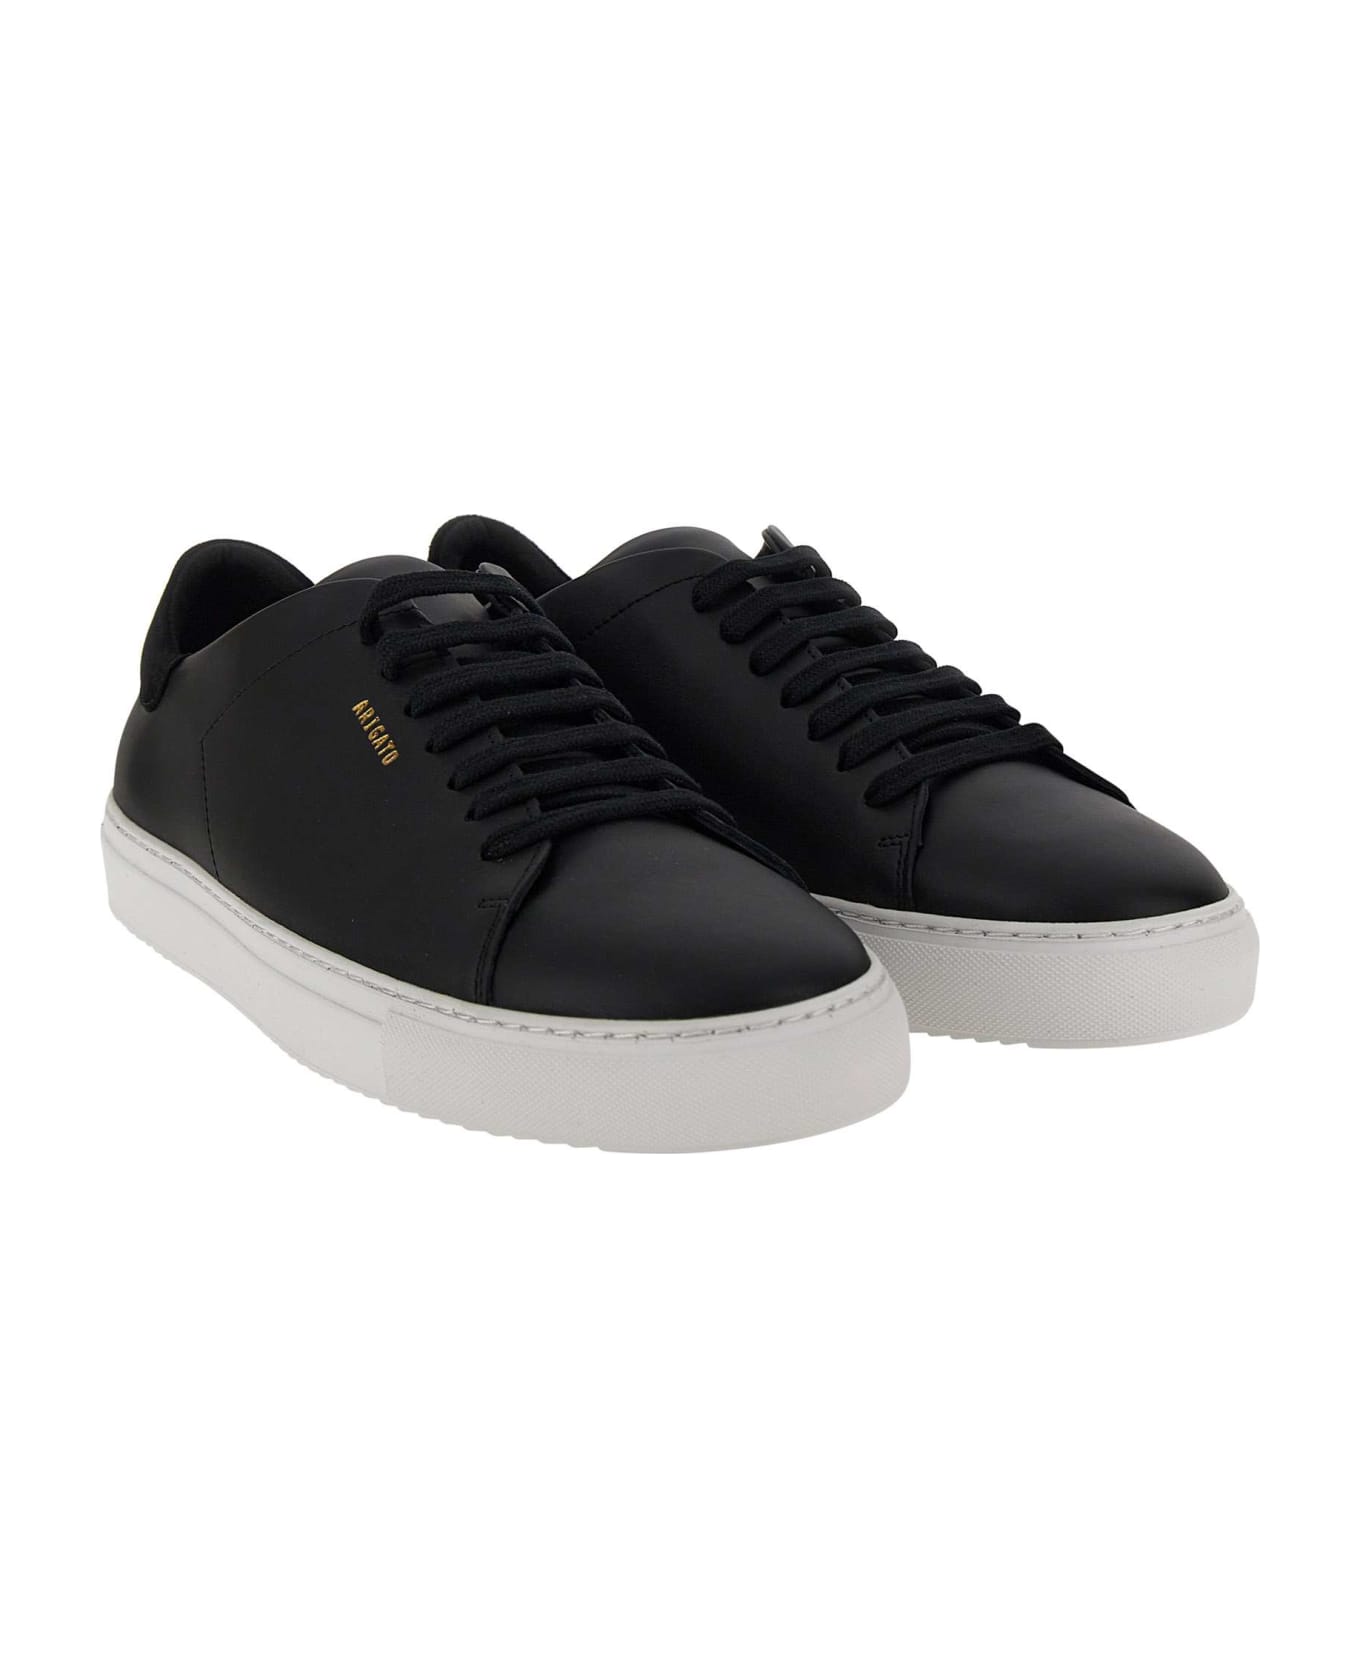 Axel Arigato "clean 90" Sneakers Leather - BLACK スニーカー